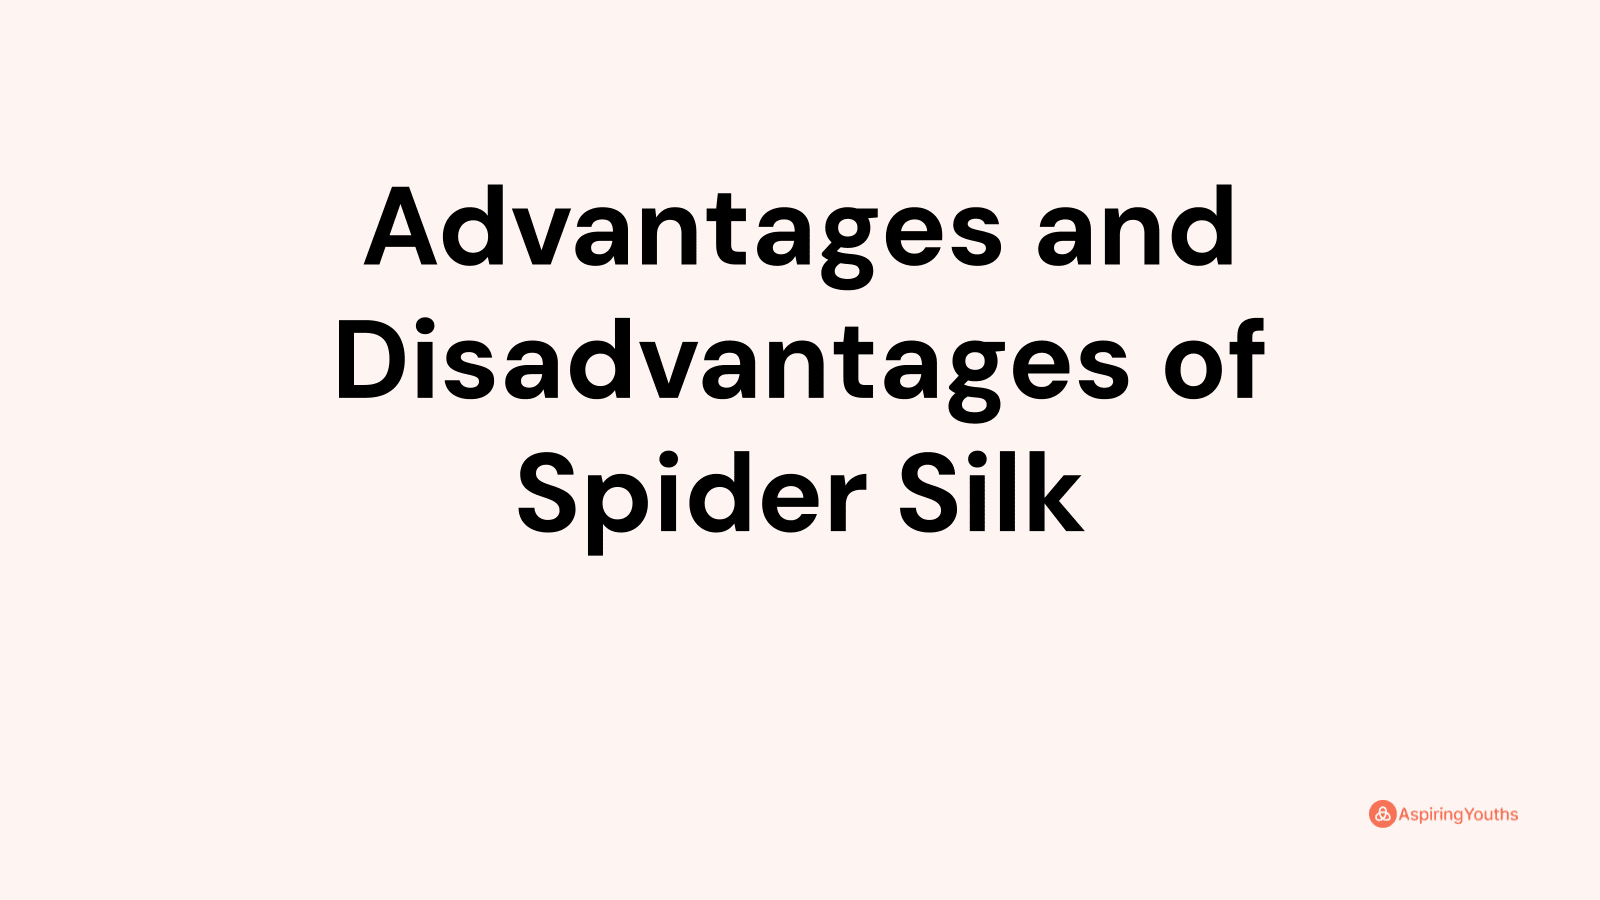 Advantages and disadvantages of Spider Silk